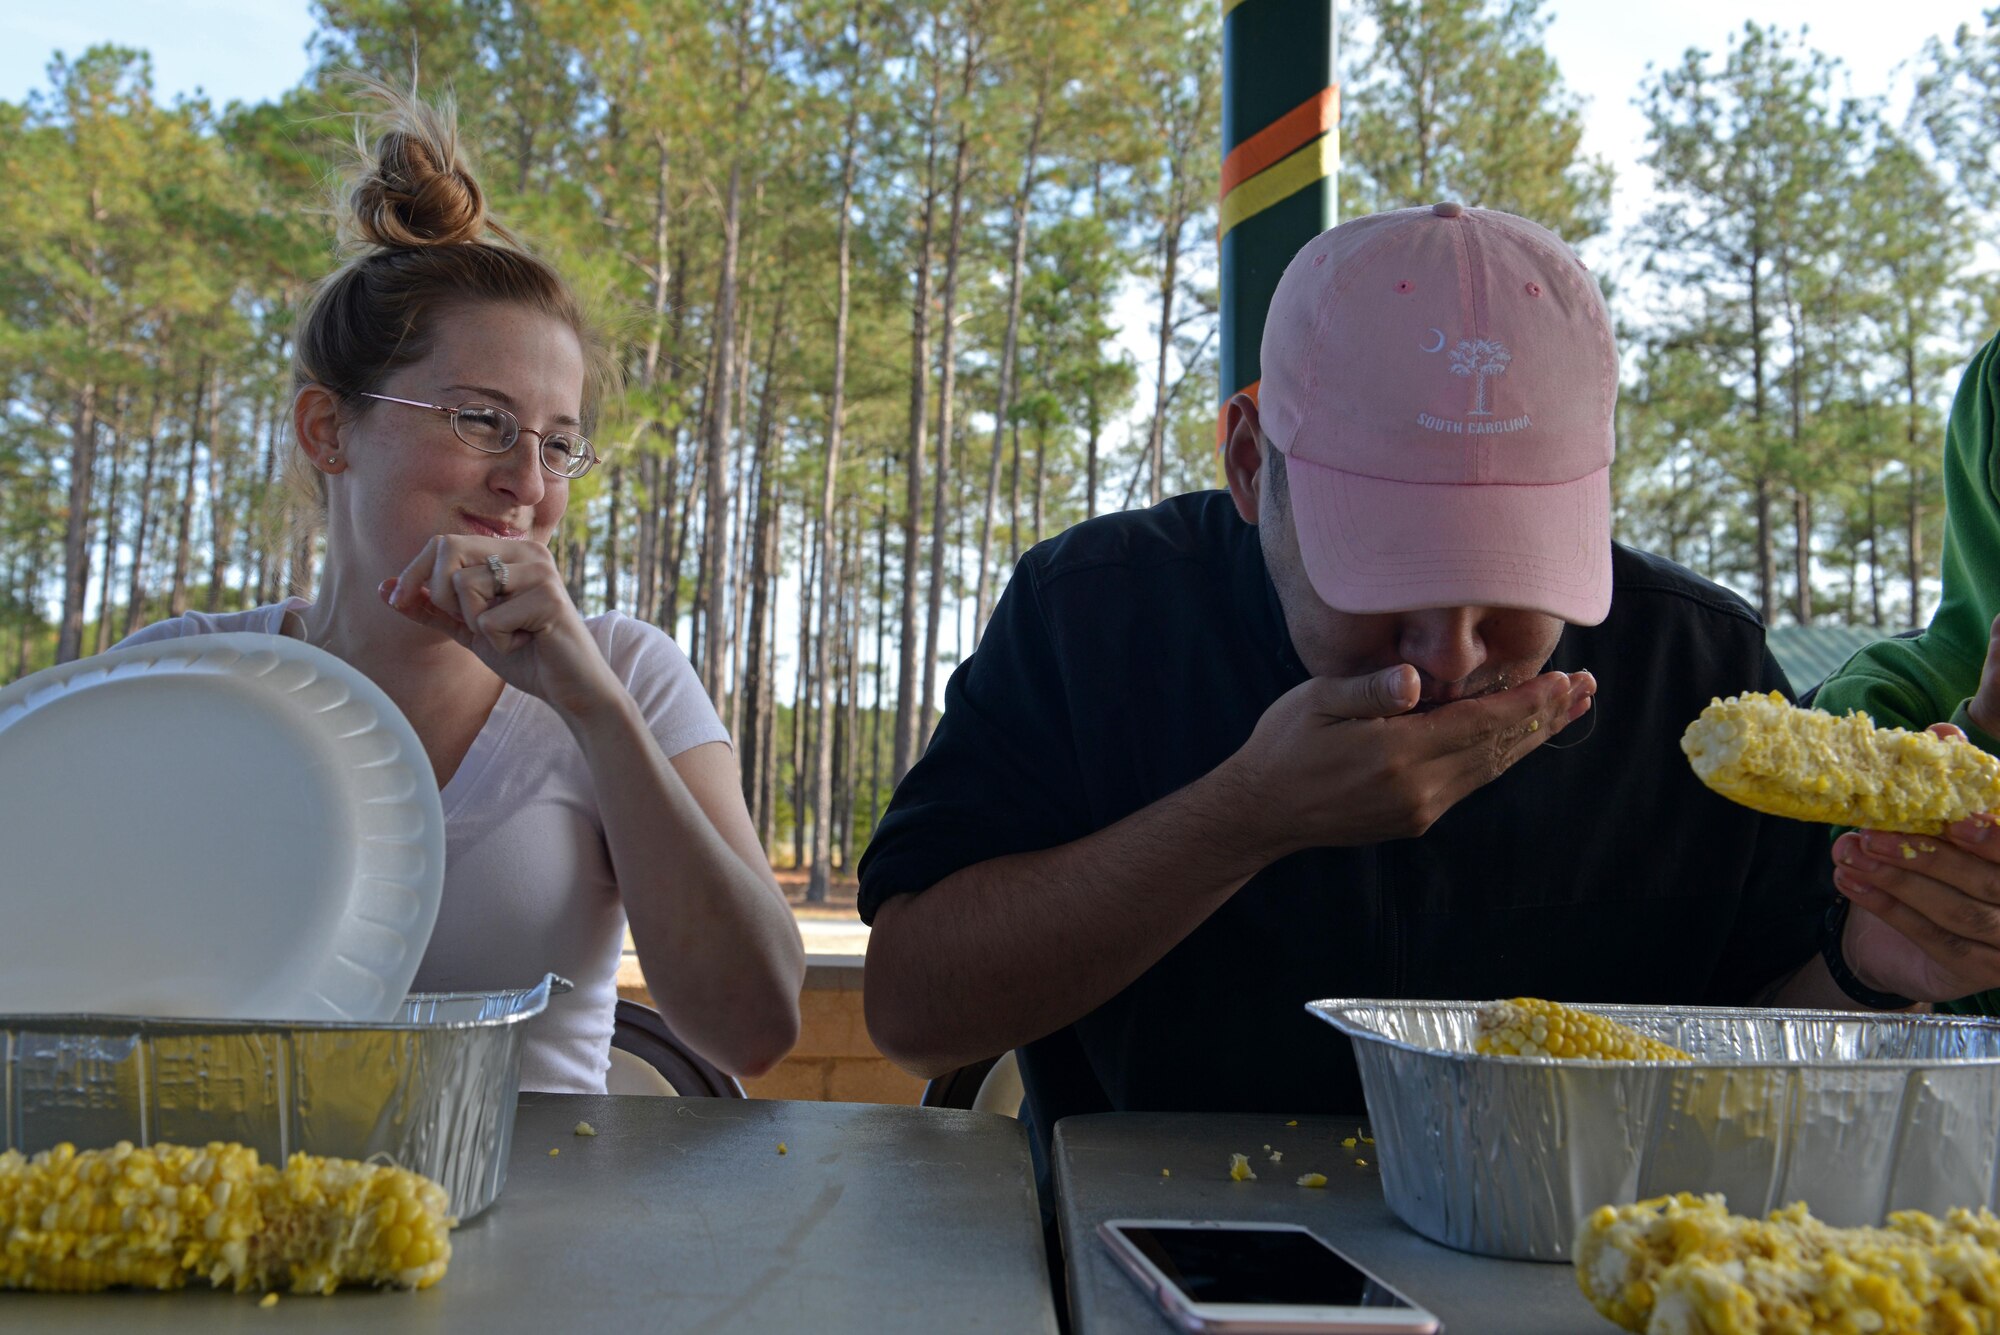 Jessica Venegas, Team Shaw spouse, and U.S. Air Force Airman Justin Foose, 20th Aerospace Medicine Squadron public health medical technician, compete during a corn-eating contest at Shaw Air Force Base, S.C., Nov. 12, 2016. The corn-eating contest was one of the many activities hosted at the second-annual Team Shaw Fall Family Picnic. (U.S. Air Force photo by Airman 1st Class Destinee Sweeney)